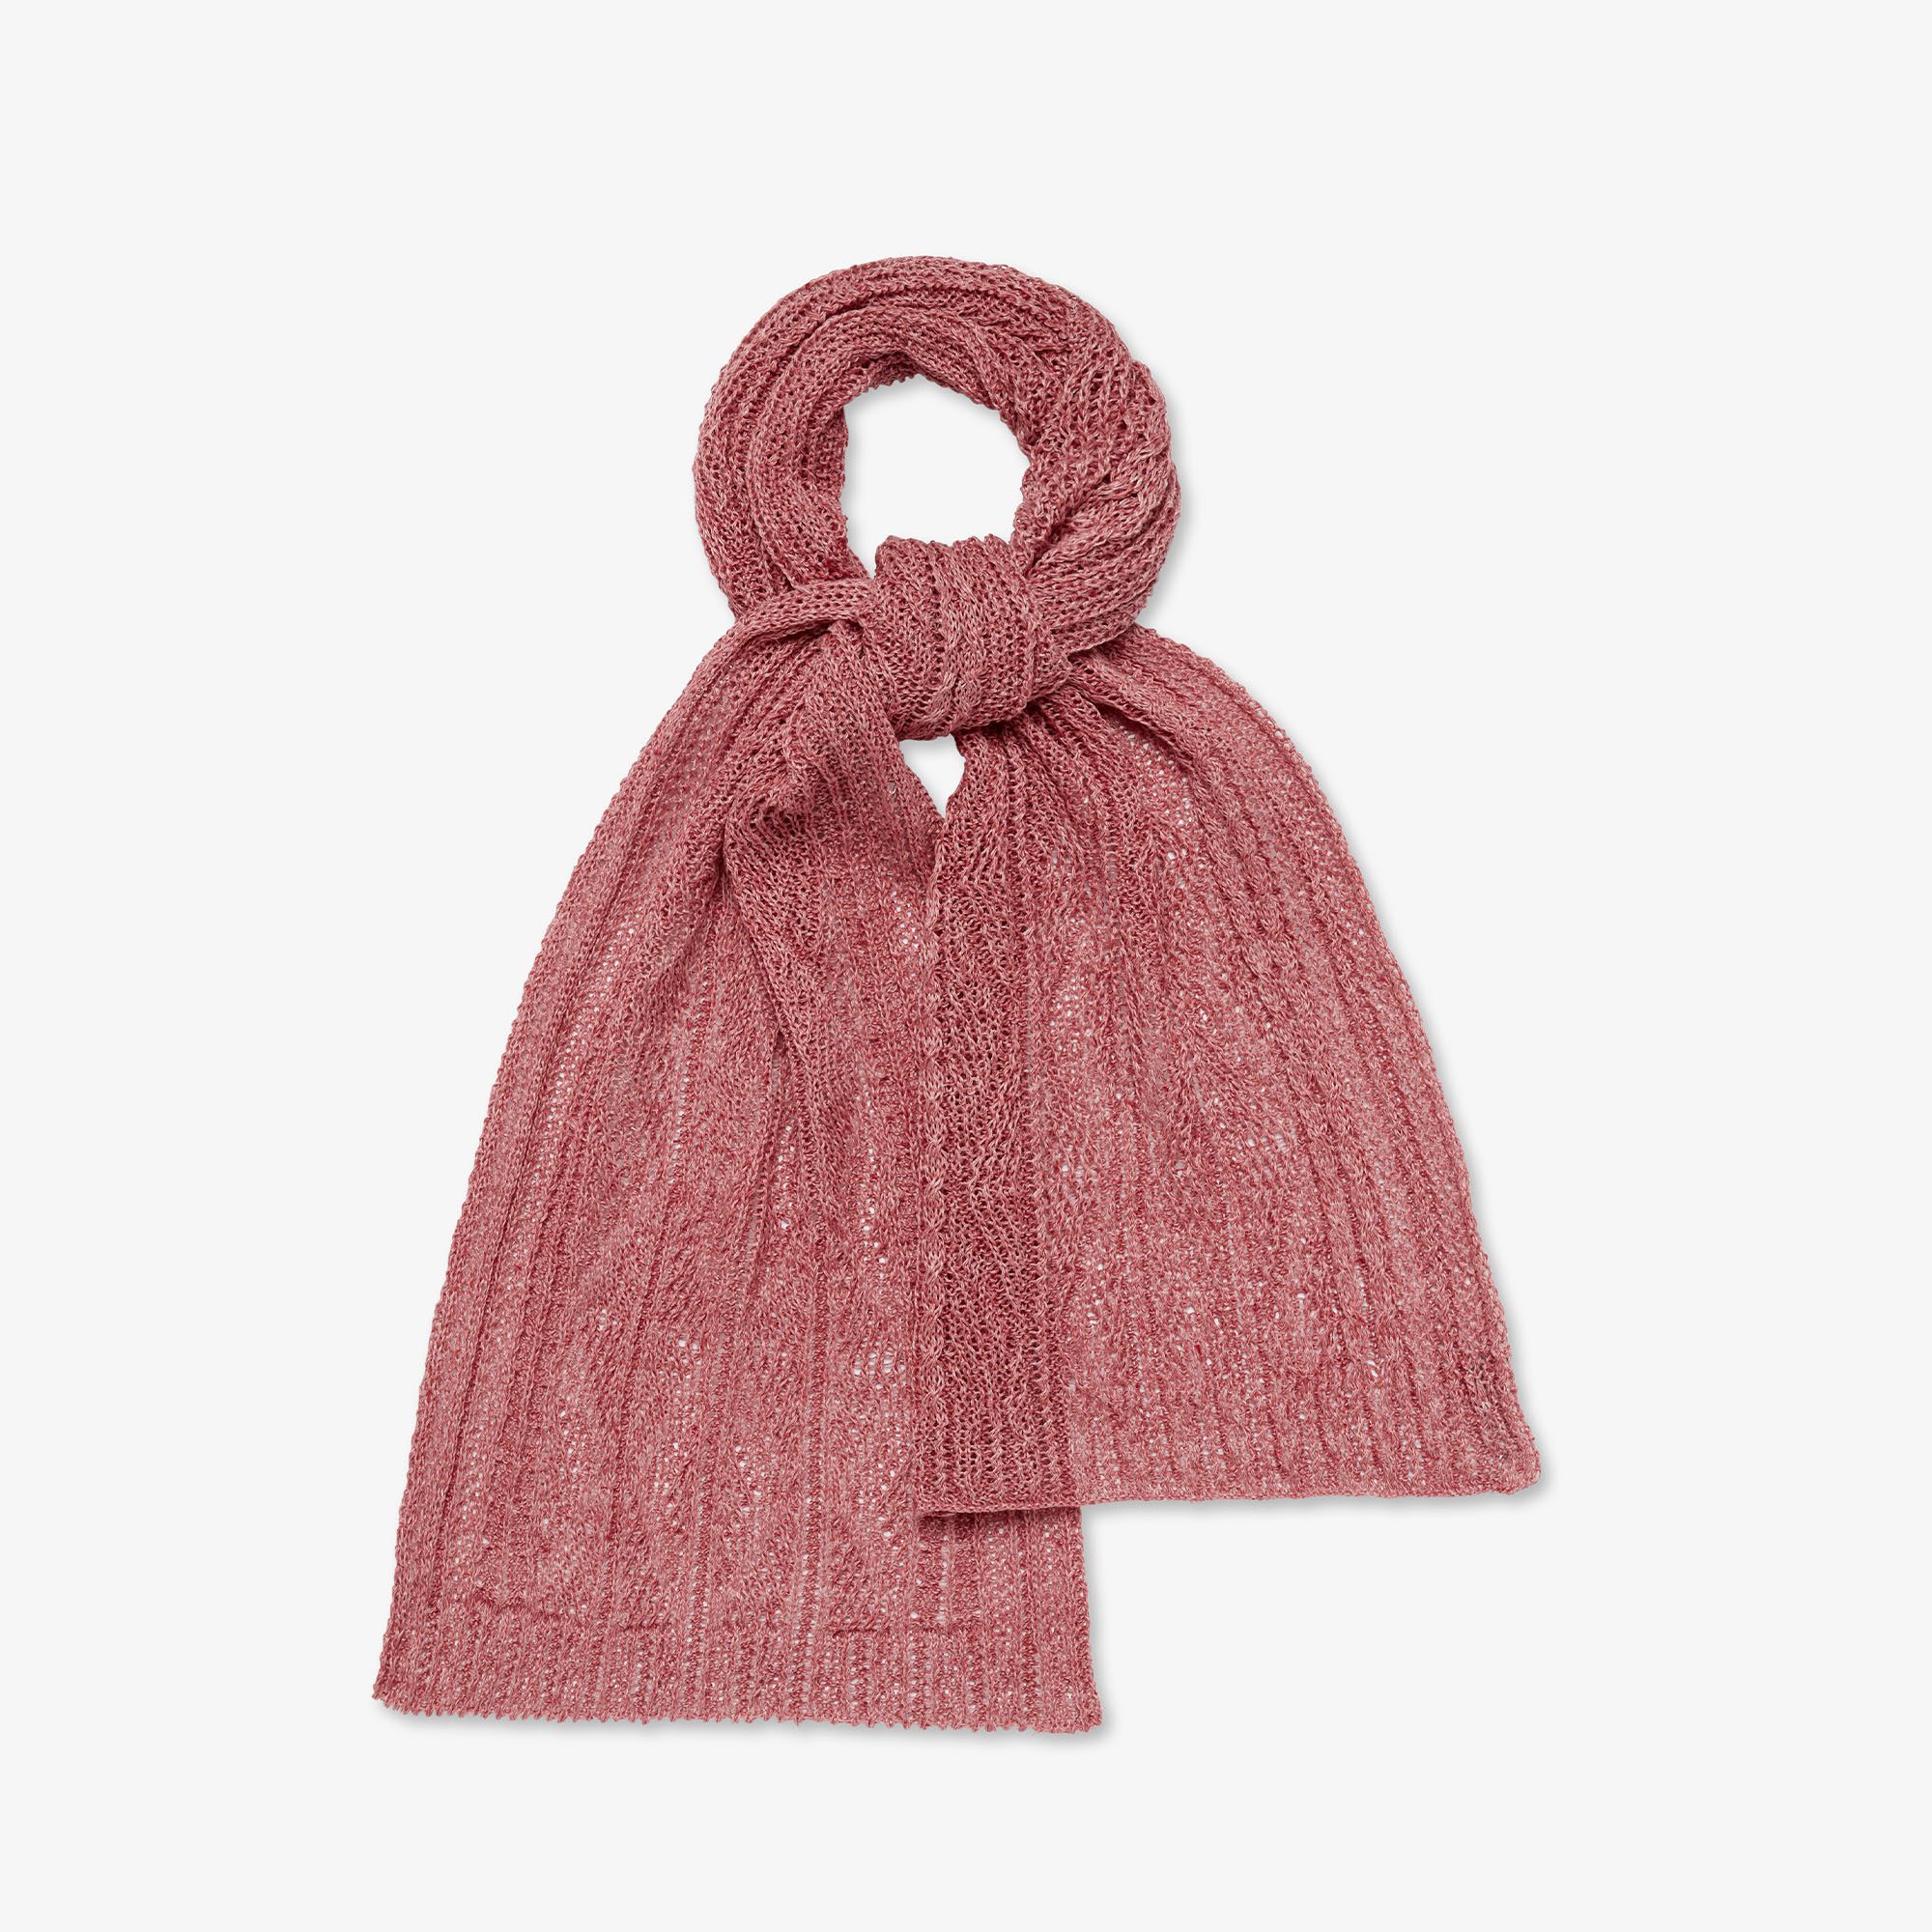 Quality Knitwear Accessories | Knitted Scarves, Hats, Shawls & Blankets